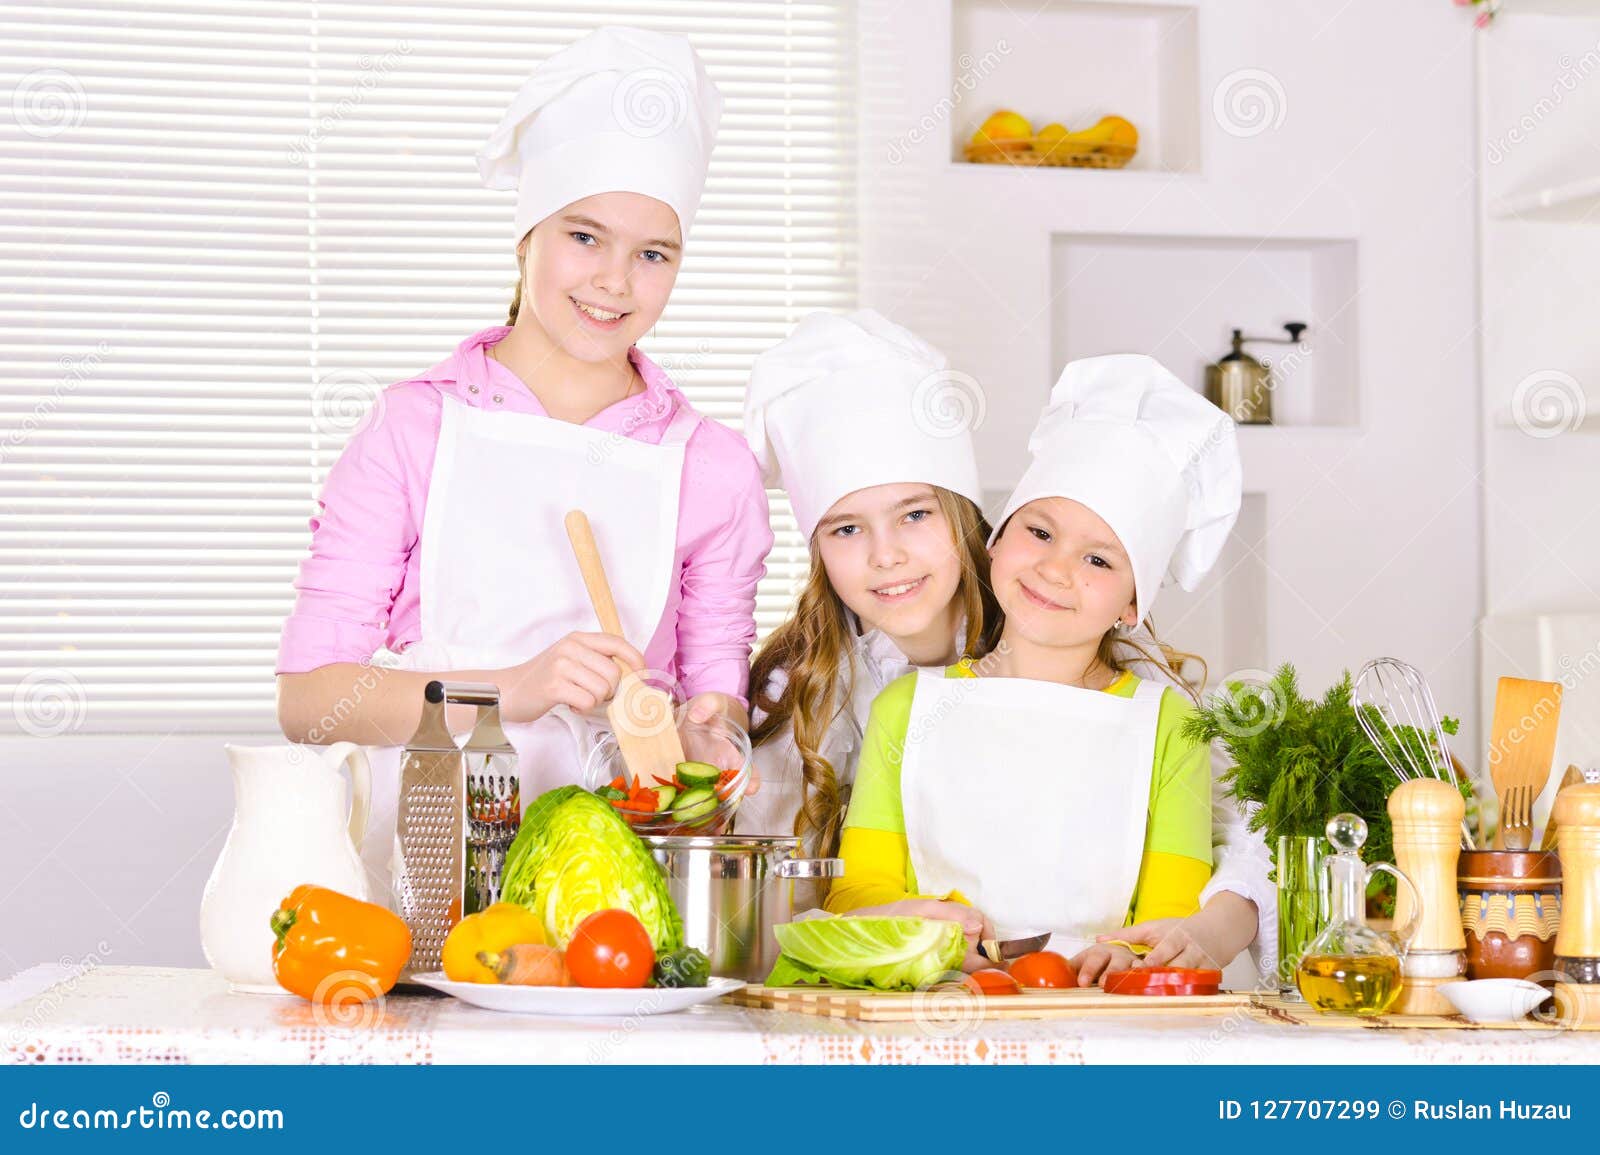 Portrait of Happy Cute Girls Cooking Vegetable Dish Stock Image - Image